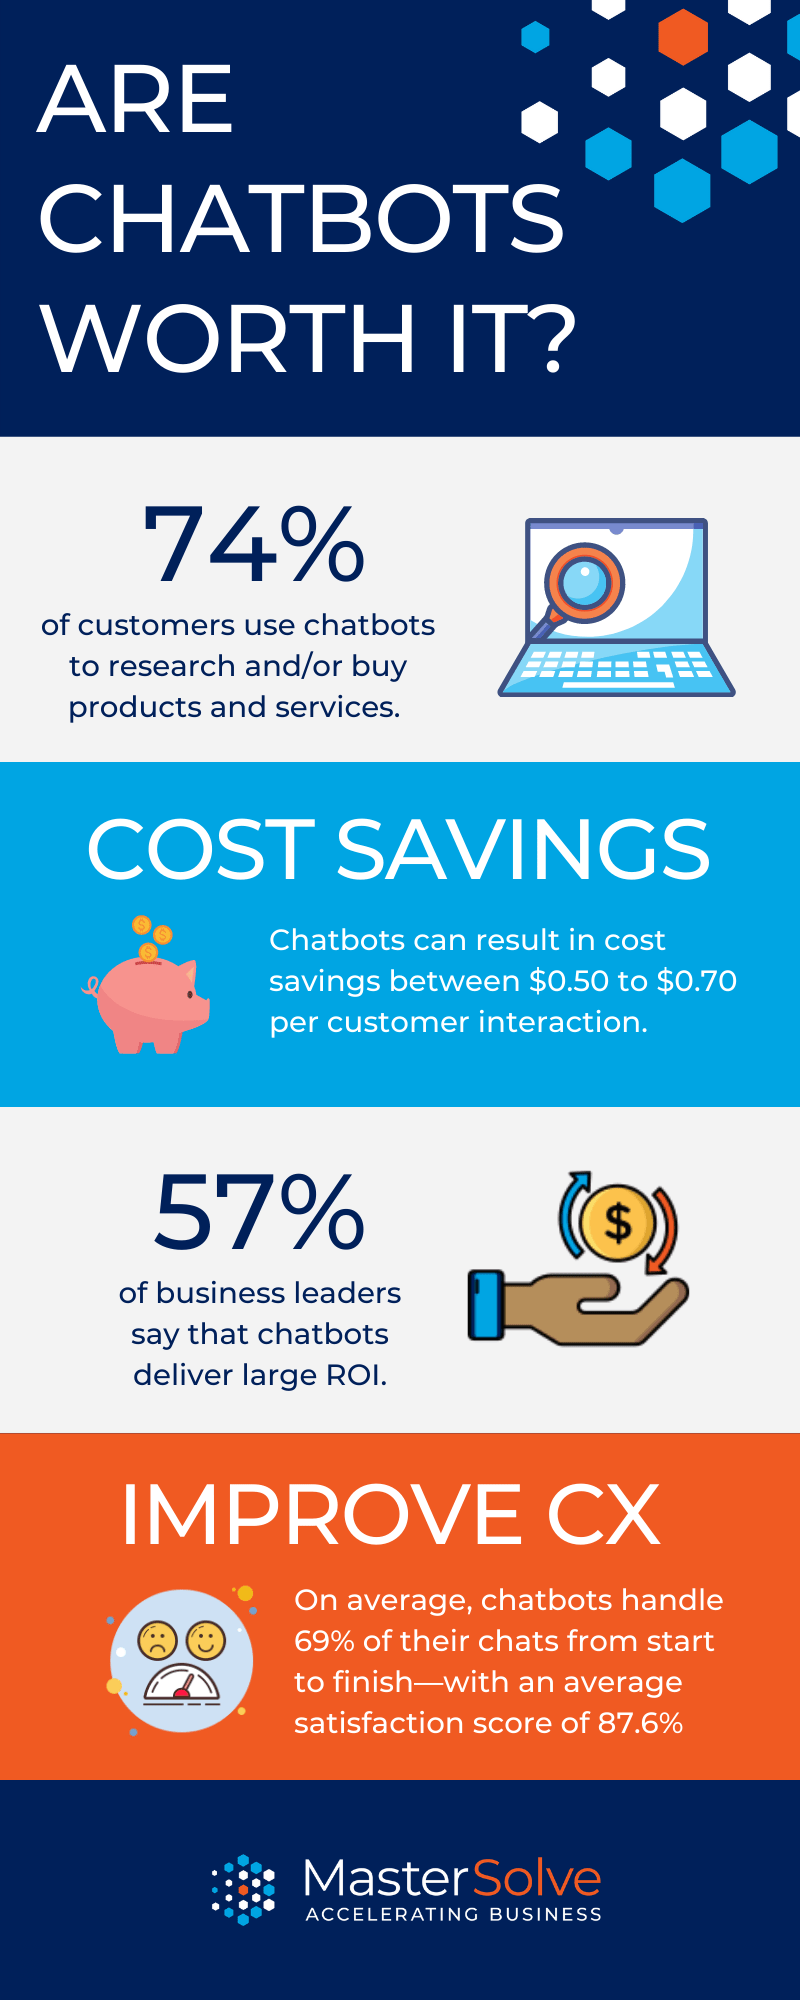 Are Chatbots Worth It? Infographic